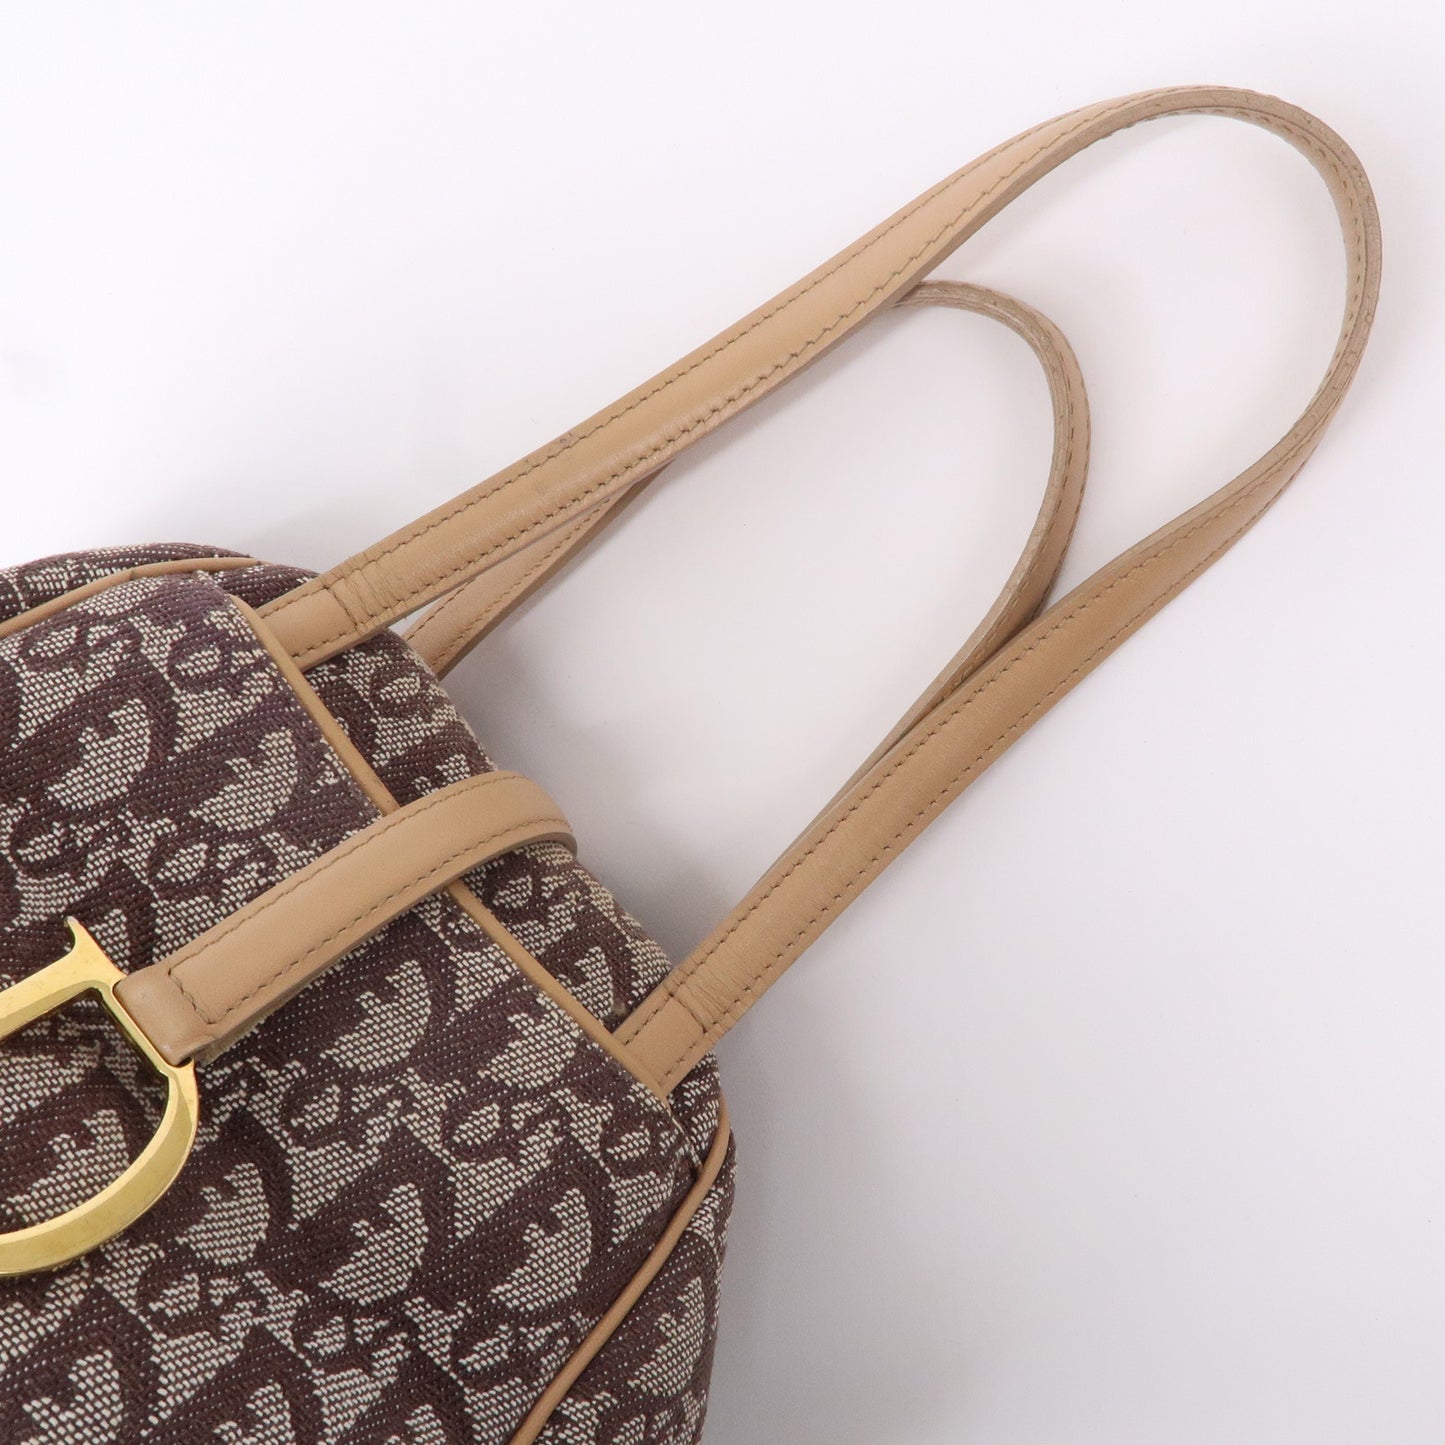 Christian Dior Trotter Canvas Leather Hand Bag Brown Beige